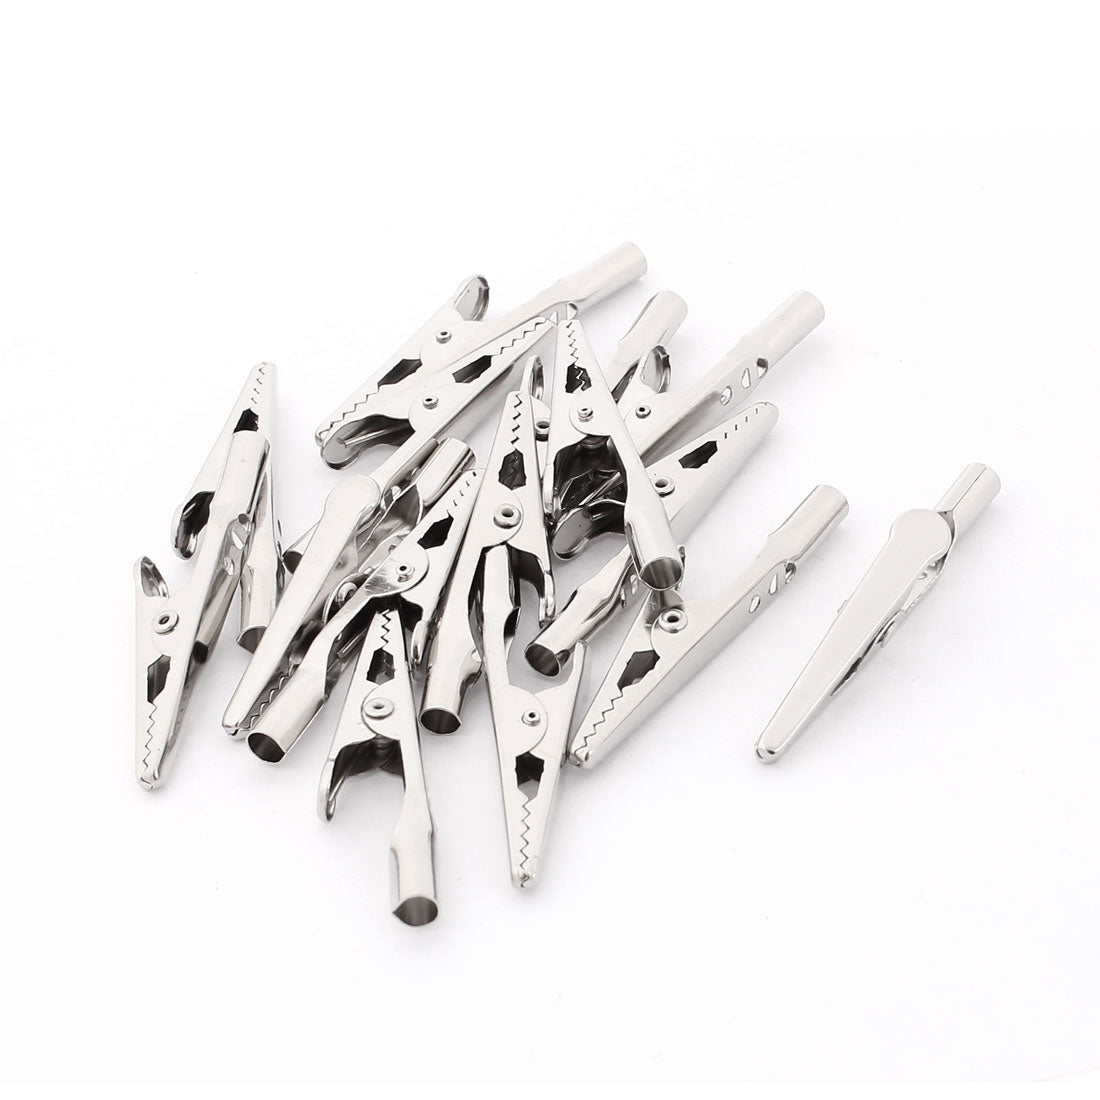 uxcell Uxcell 15 Pcs Alligator Clips With Teeth Aligator Hair Bows Metal Clips Silver Tone